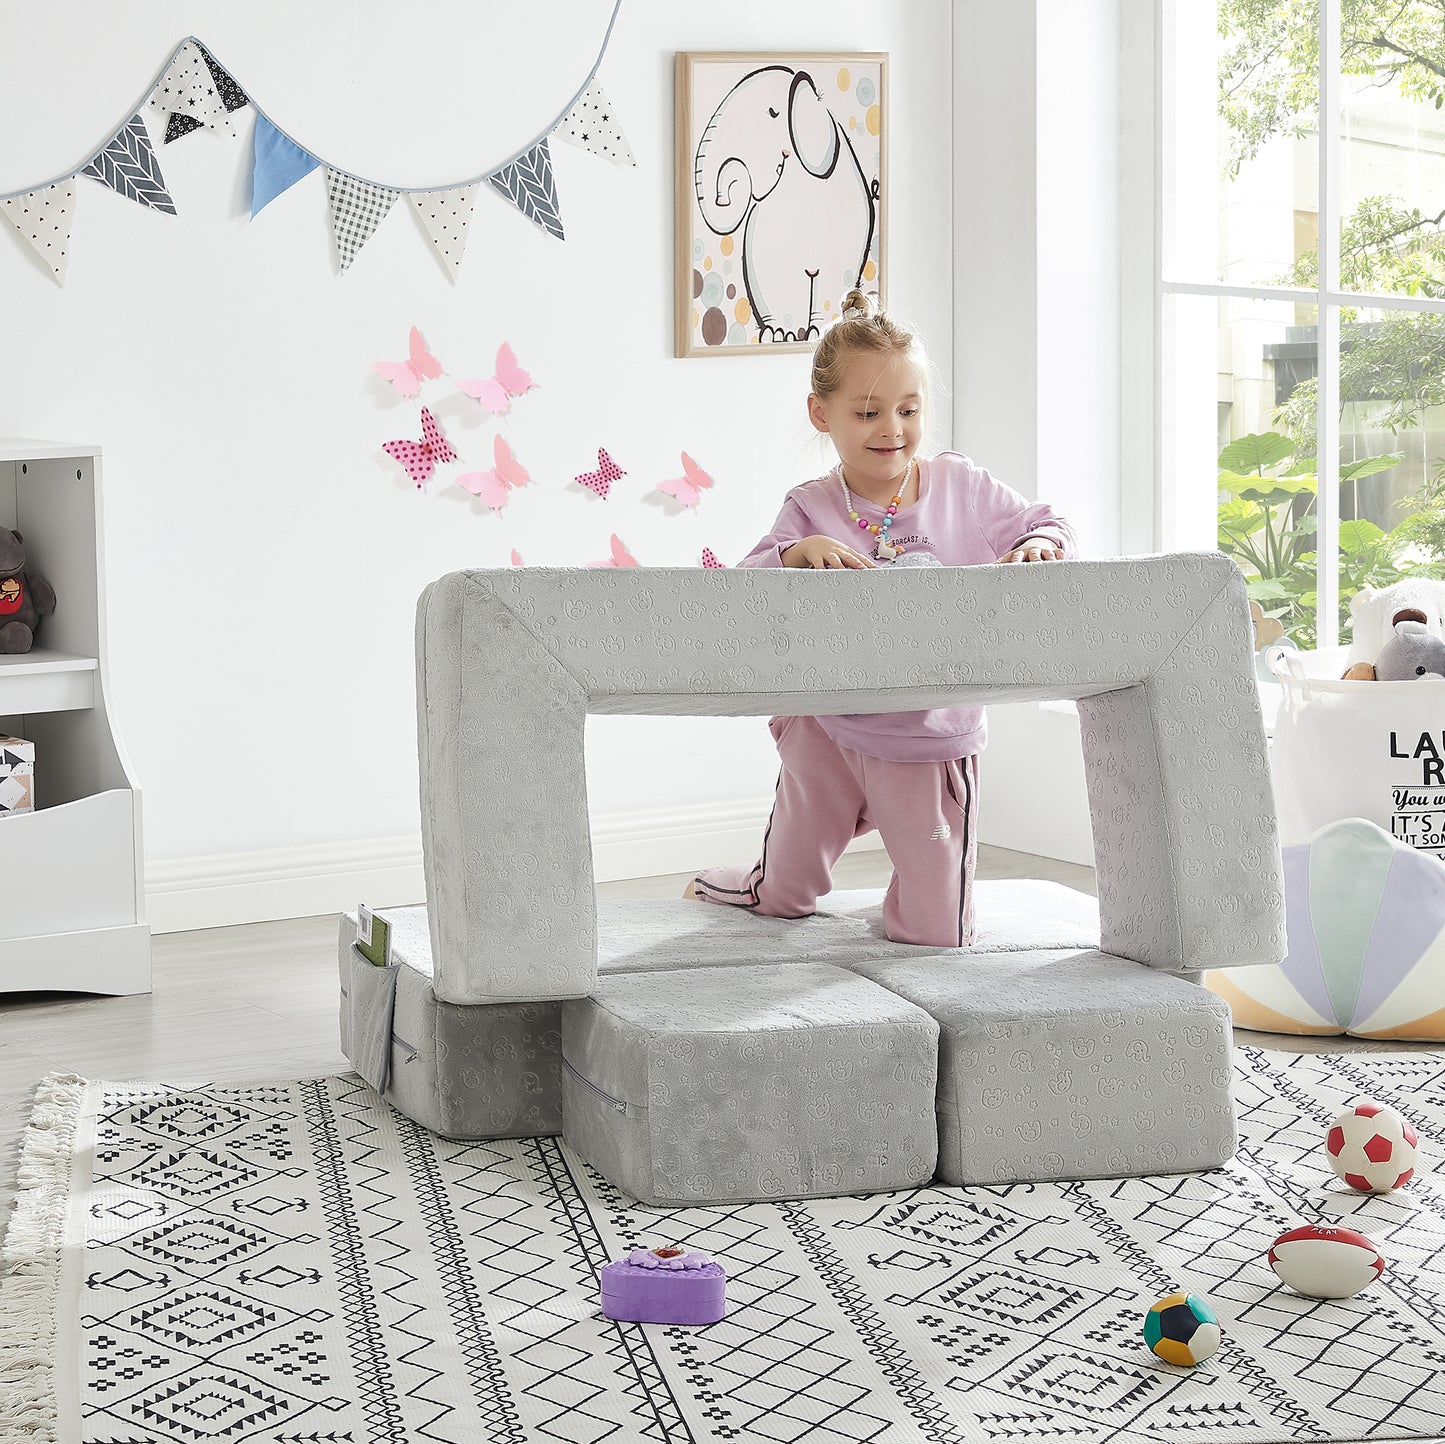 Modular Kids Loveseat/ Sleeper Sofa/ Play Set 3-in-1 Multi-Functional Toddler Convertible Flip Chair with 2 Ottomans, Gray